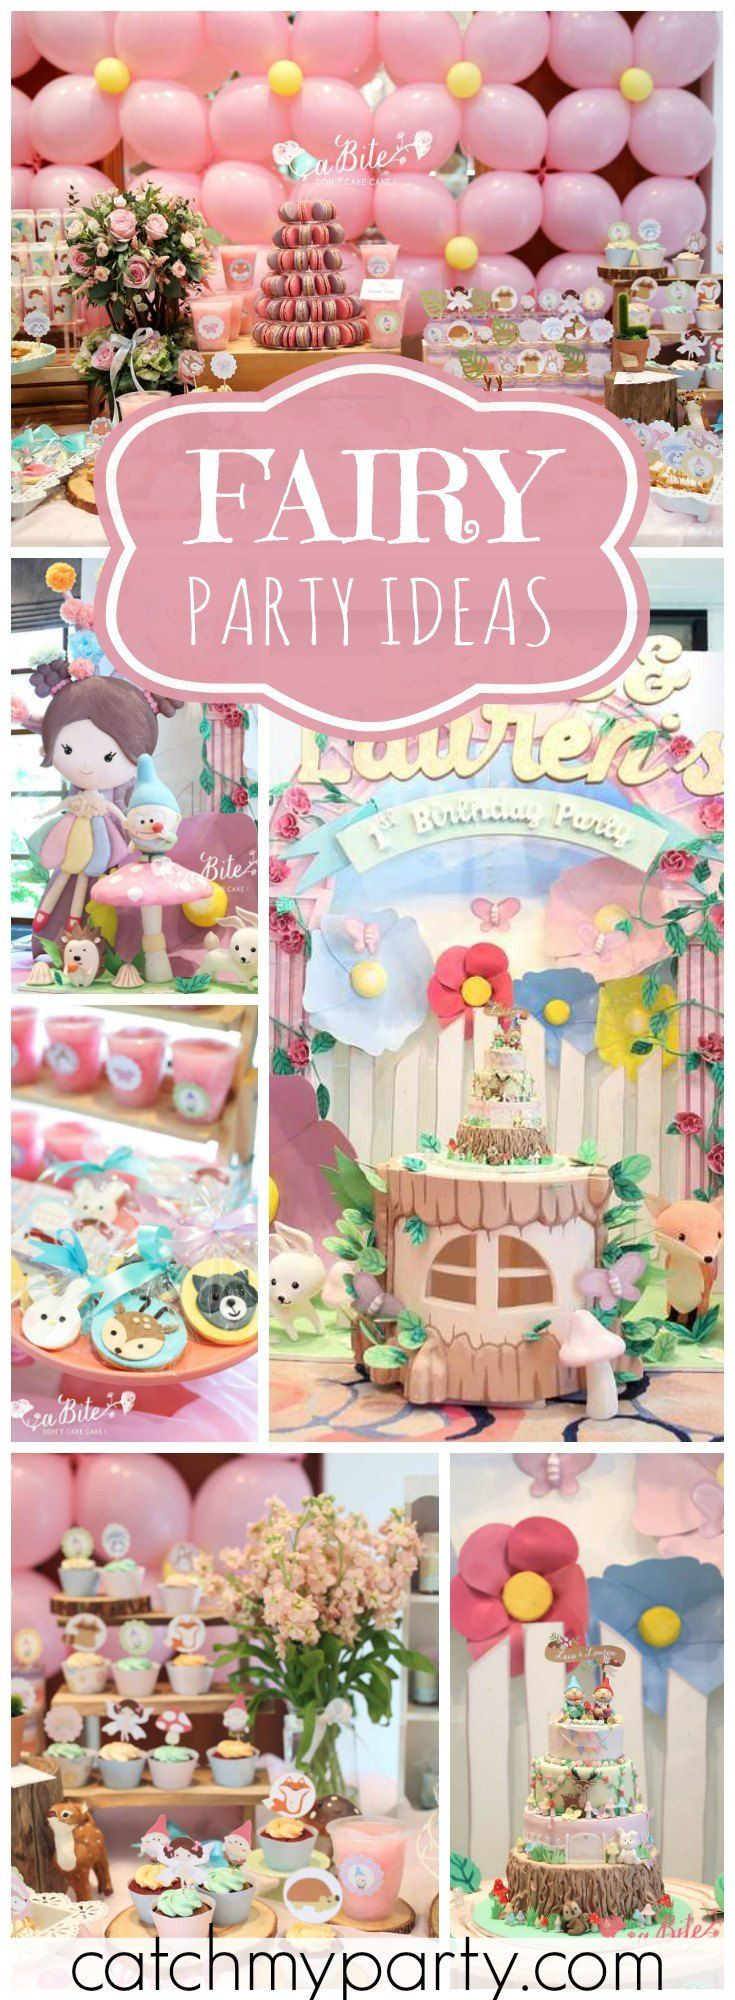 Fairy Birthday Party Decorations
 What an incredible garden fairy girl birthday party See